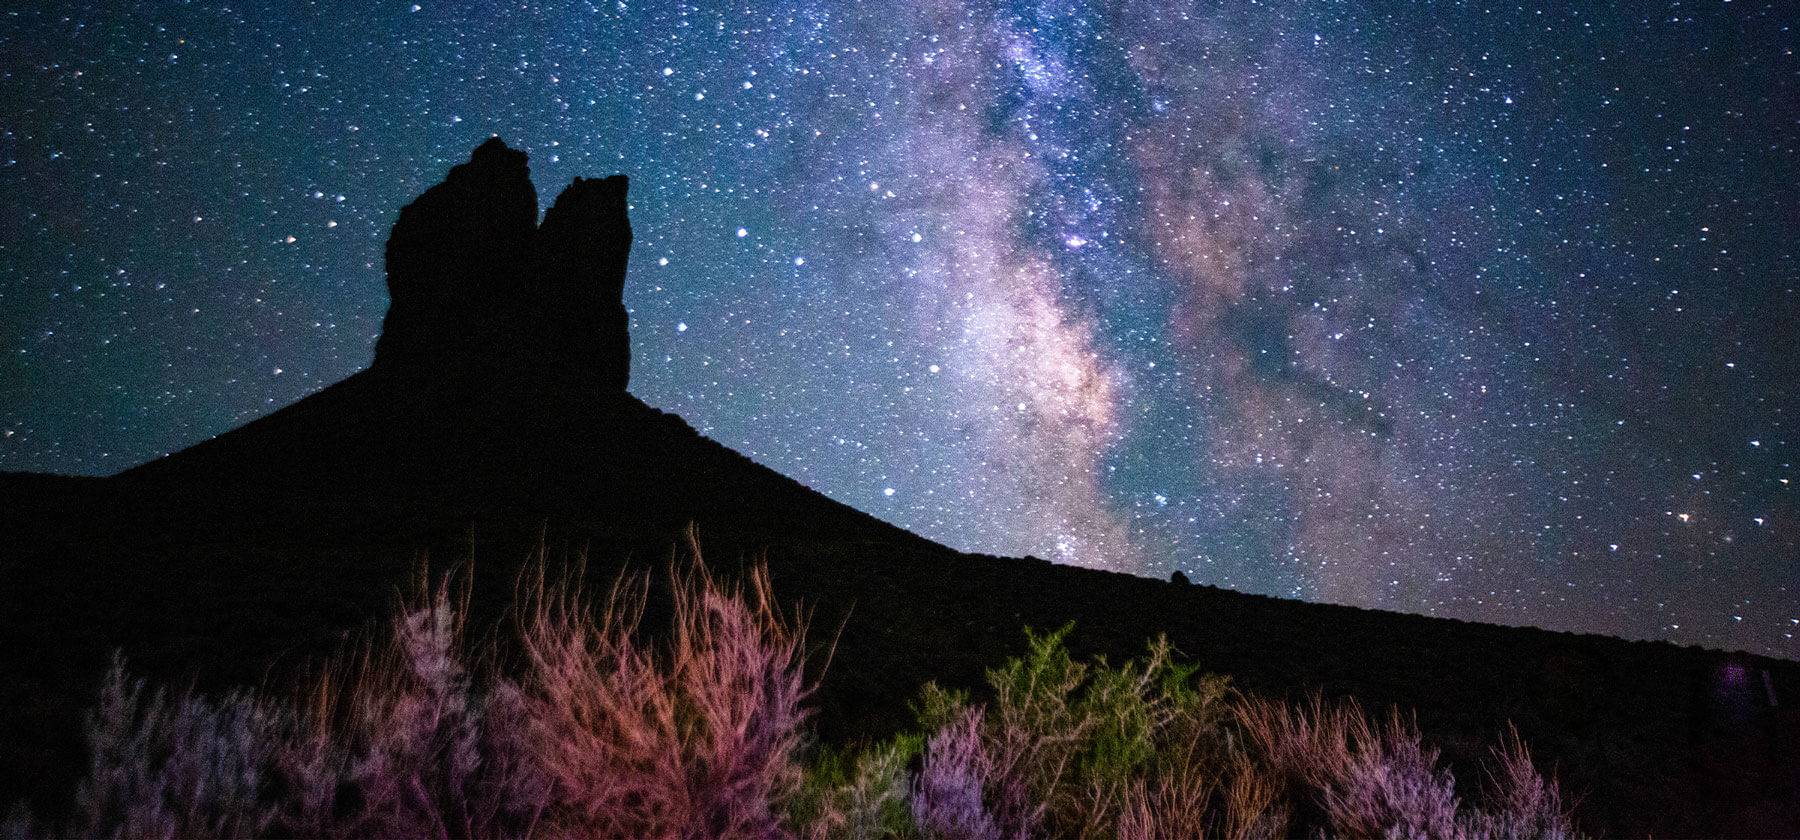 See the greatest places to view the unobstructed night sky